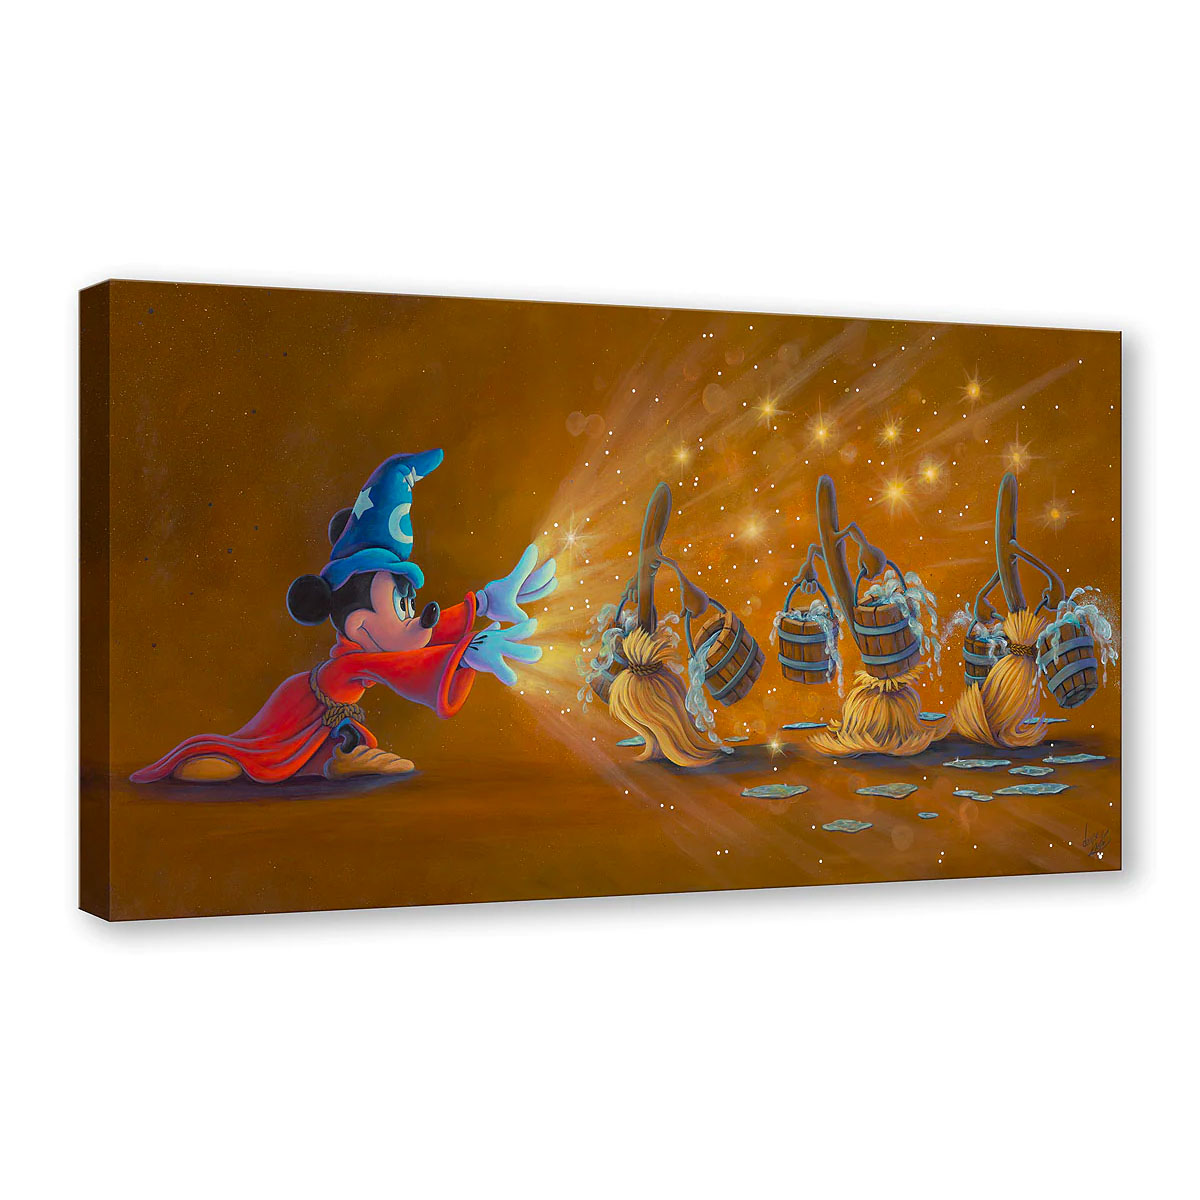 Denyse Klette Disney "Spellbound" Limited Edition Canvas Giclee